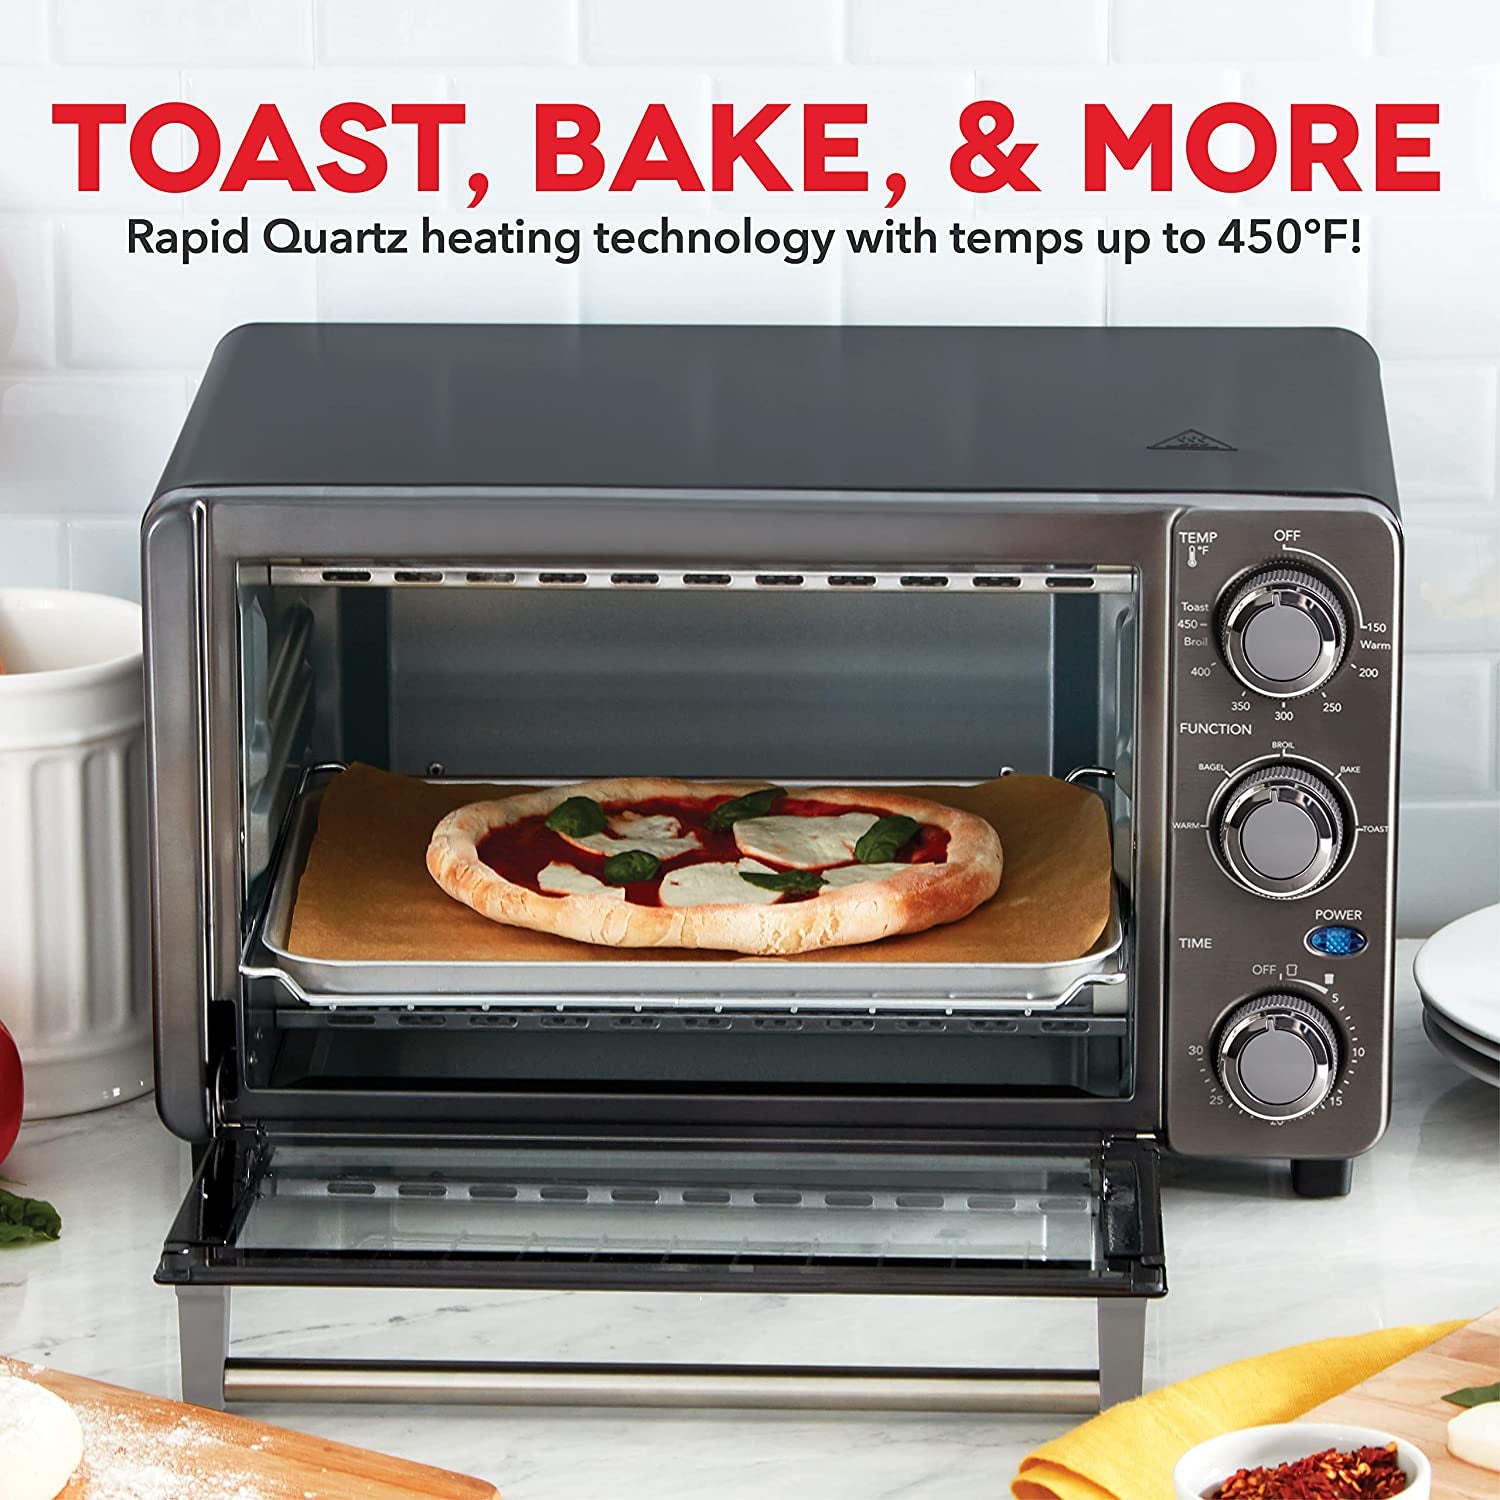 DASH Quartz Technology Express Countertop Toaster Oven - Bake, Broil, and Toast with 4 Slice Capacity and Pizza Capability - Black